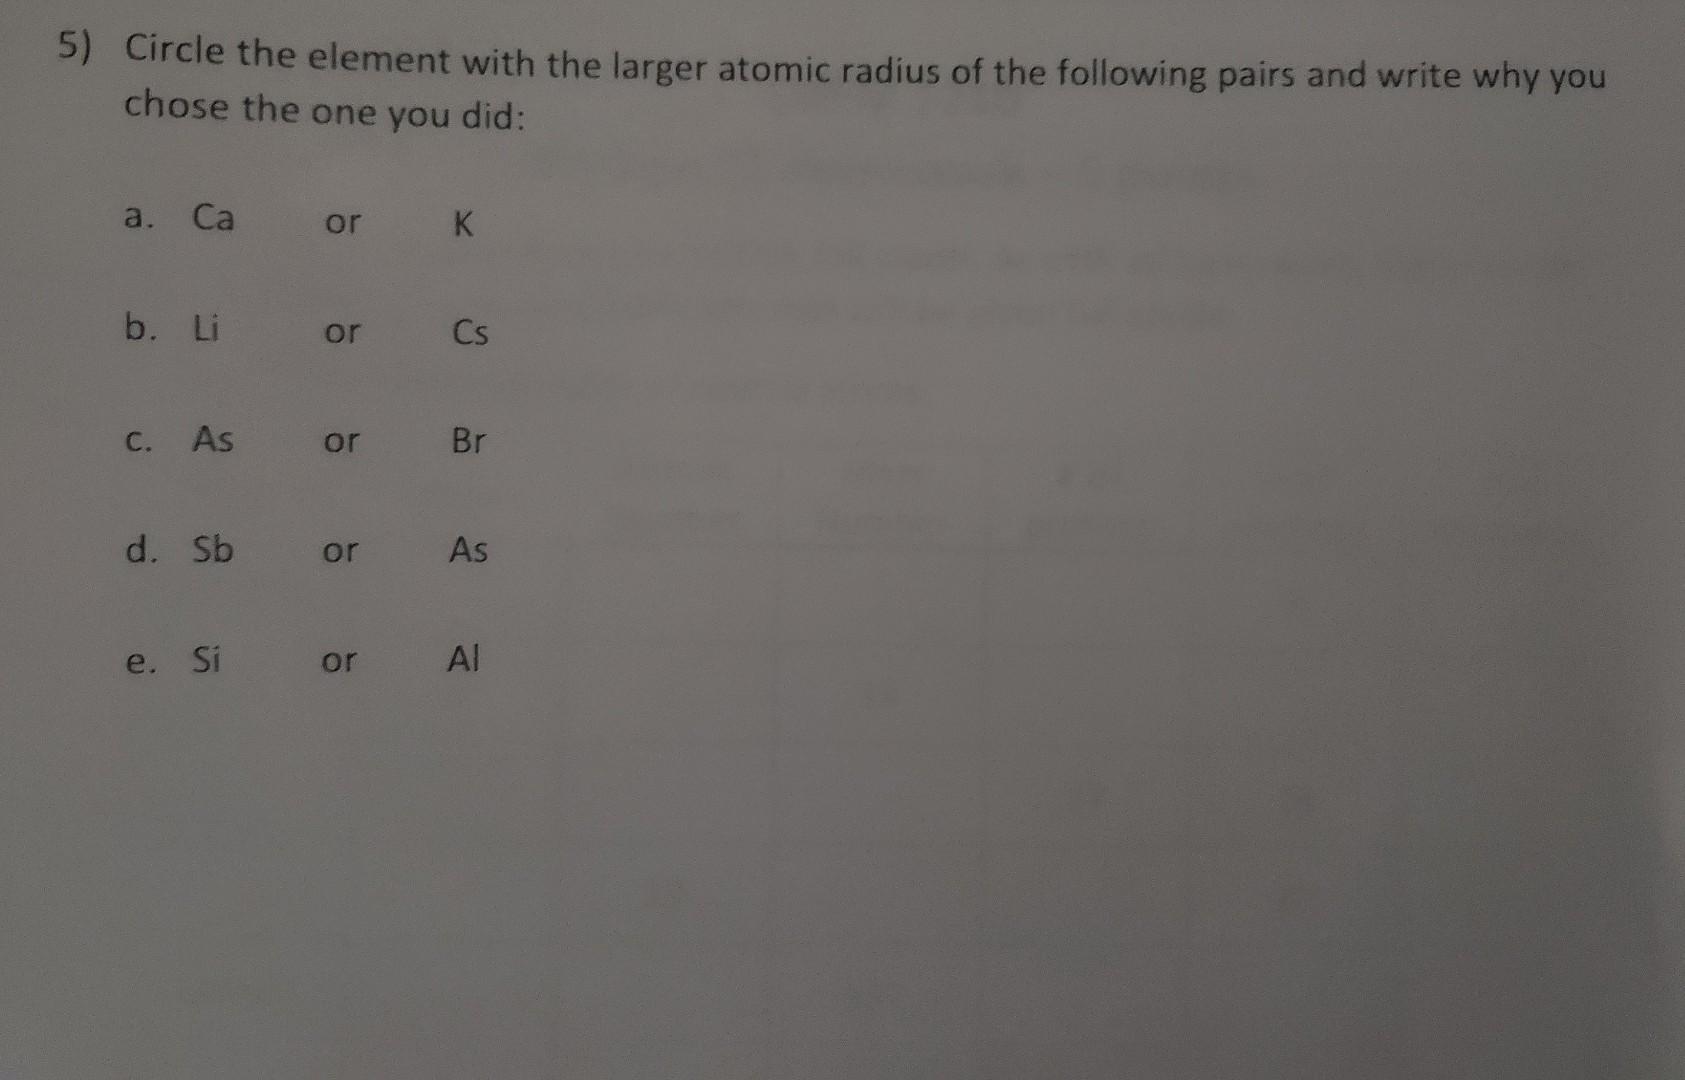 5) Circle the element with the larger atomic radius of the following pairs and write why you chose the one you did: